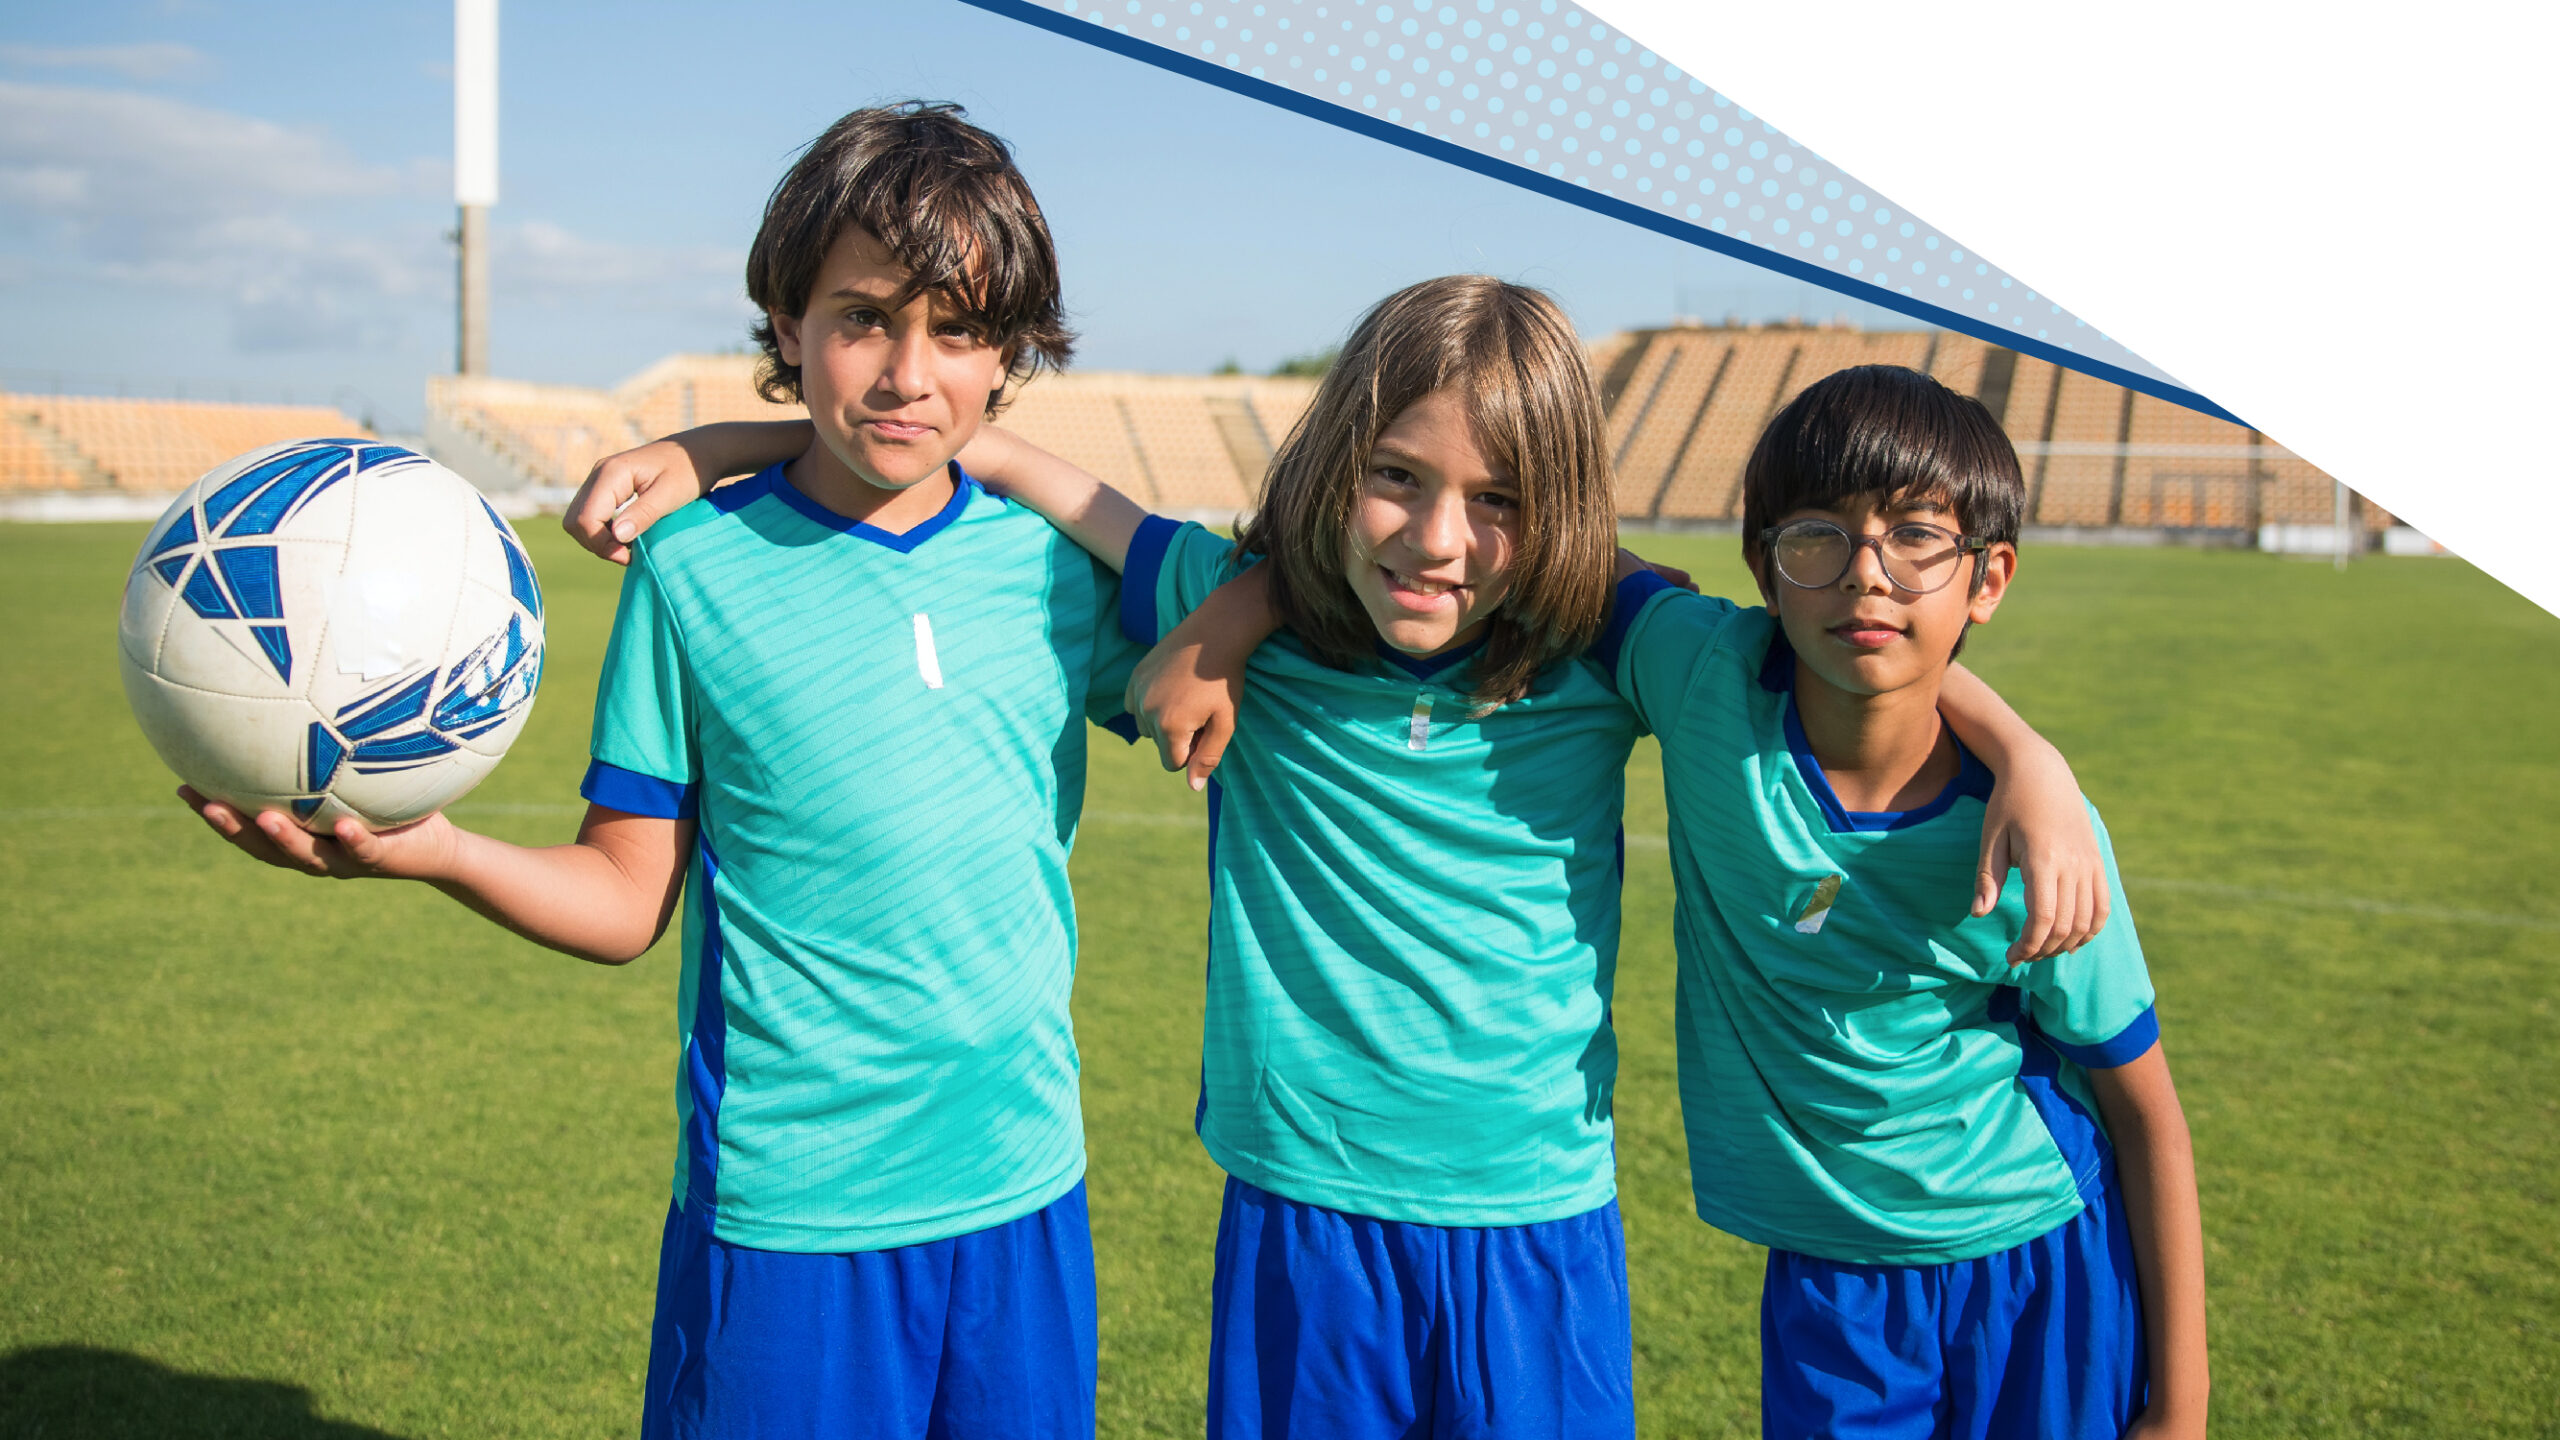 When Should Kids Start Playing Sports? Image of children soccer players